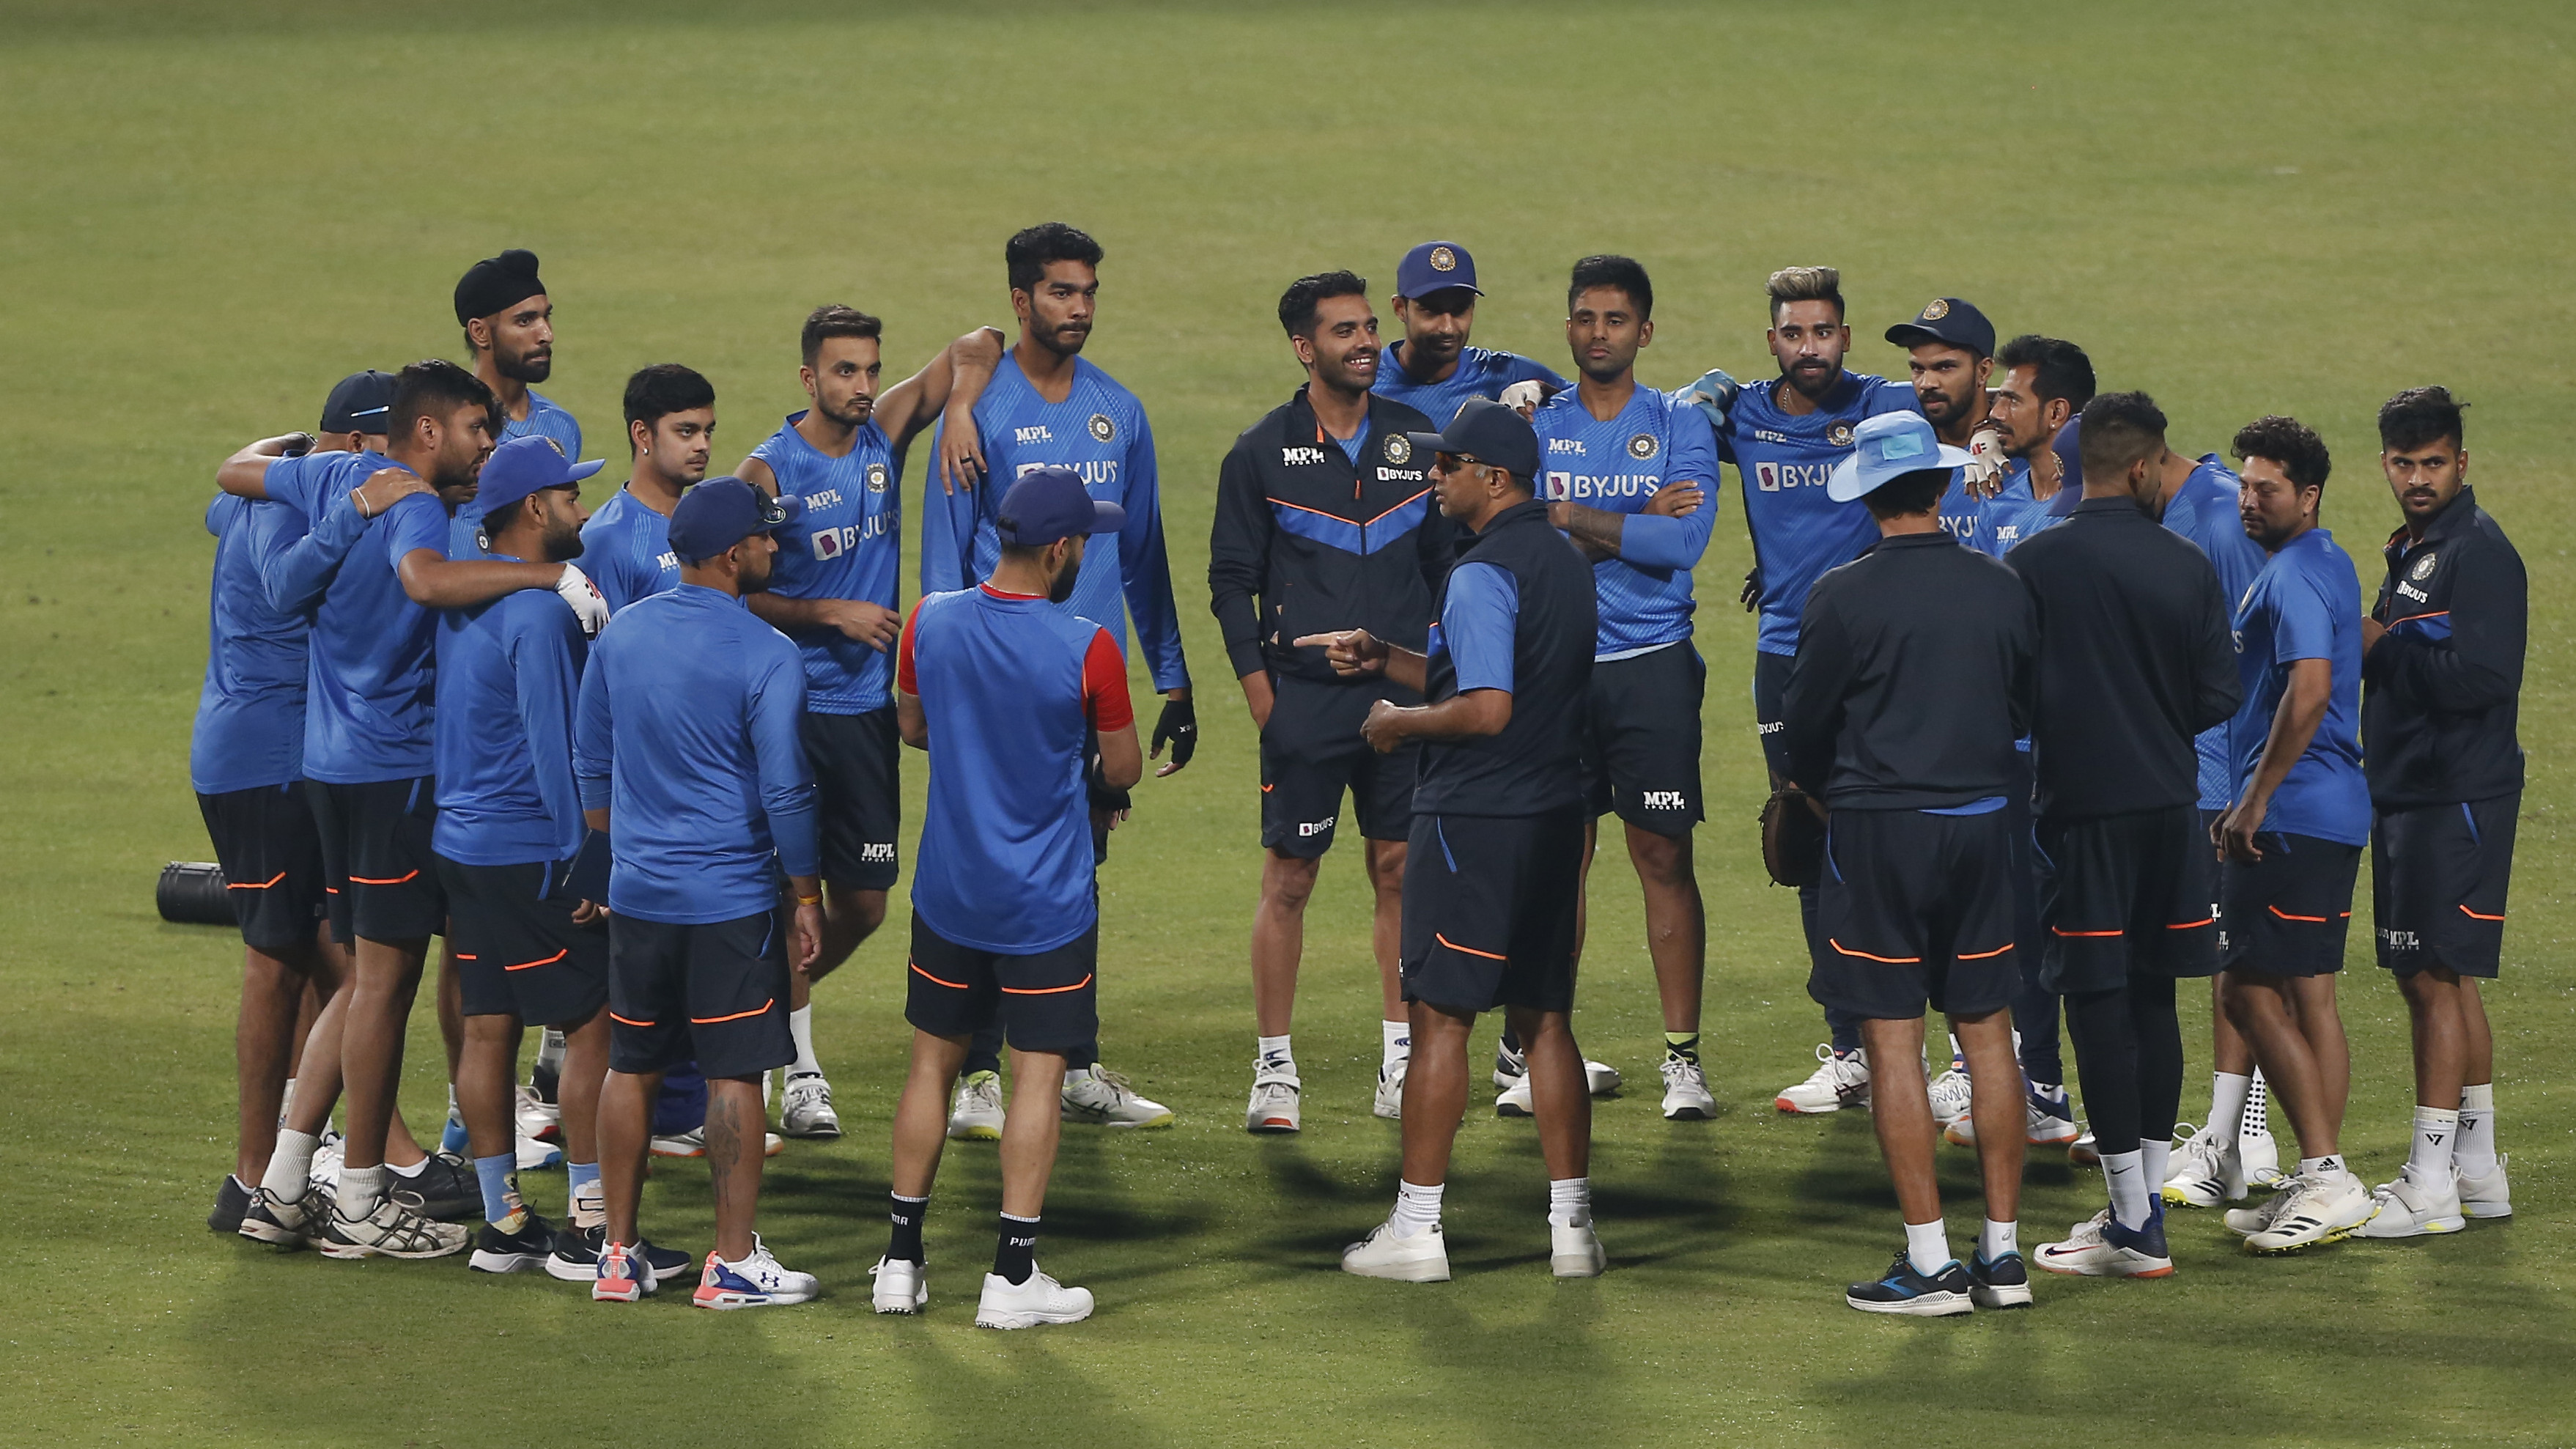 IND v WI 2022: COC Predicted Team India Playing XI for the first T20I against West Indies